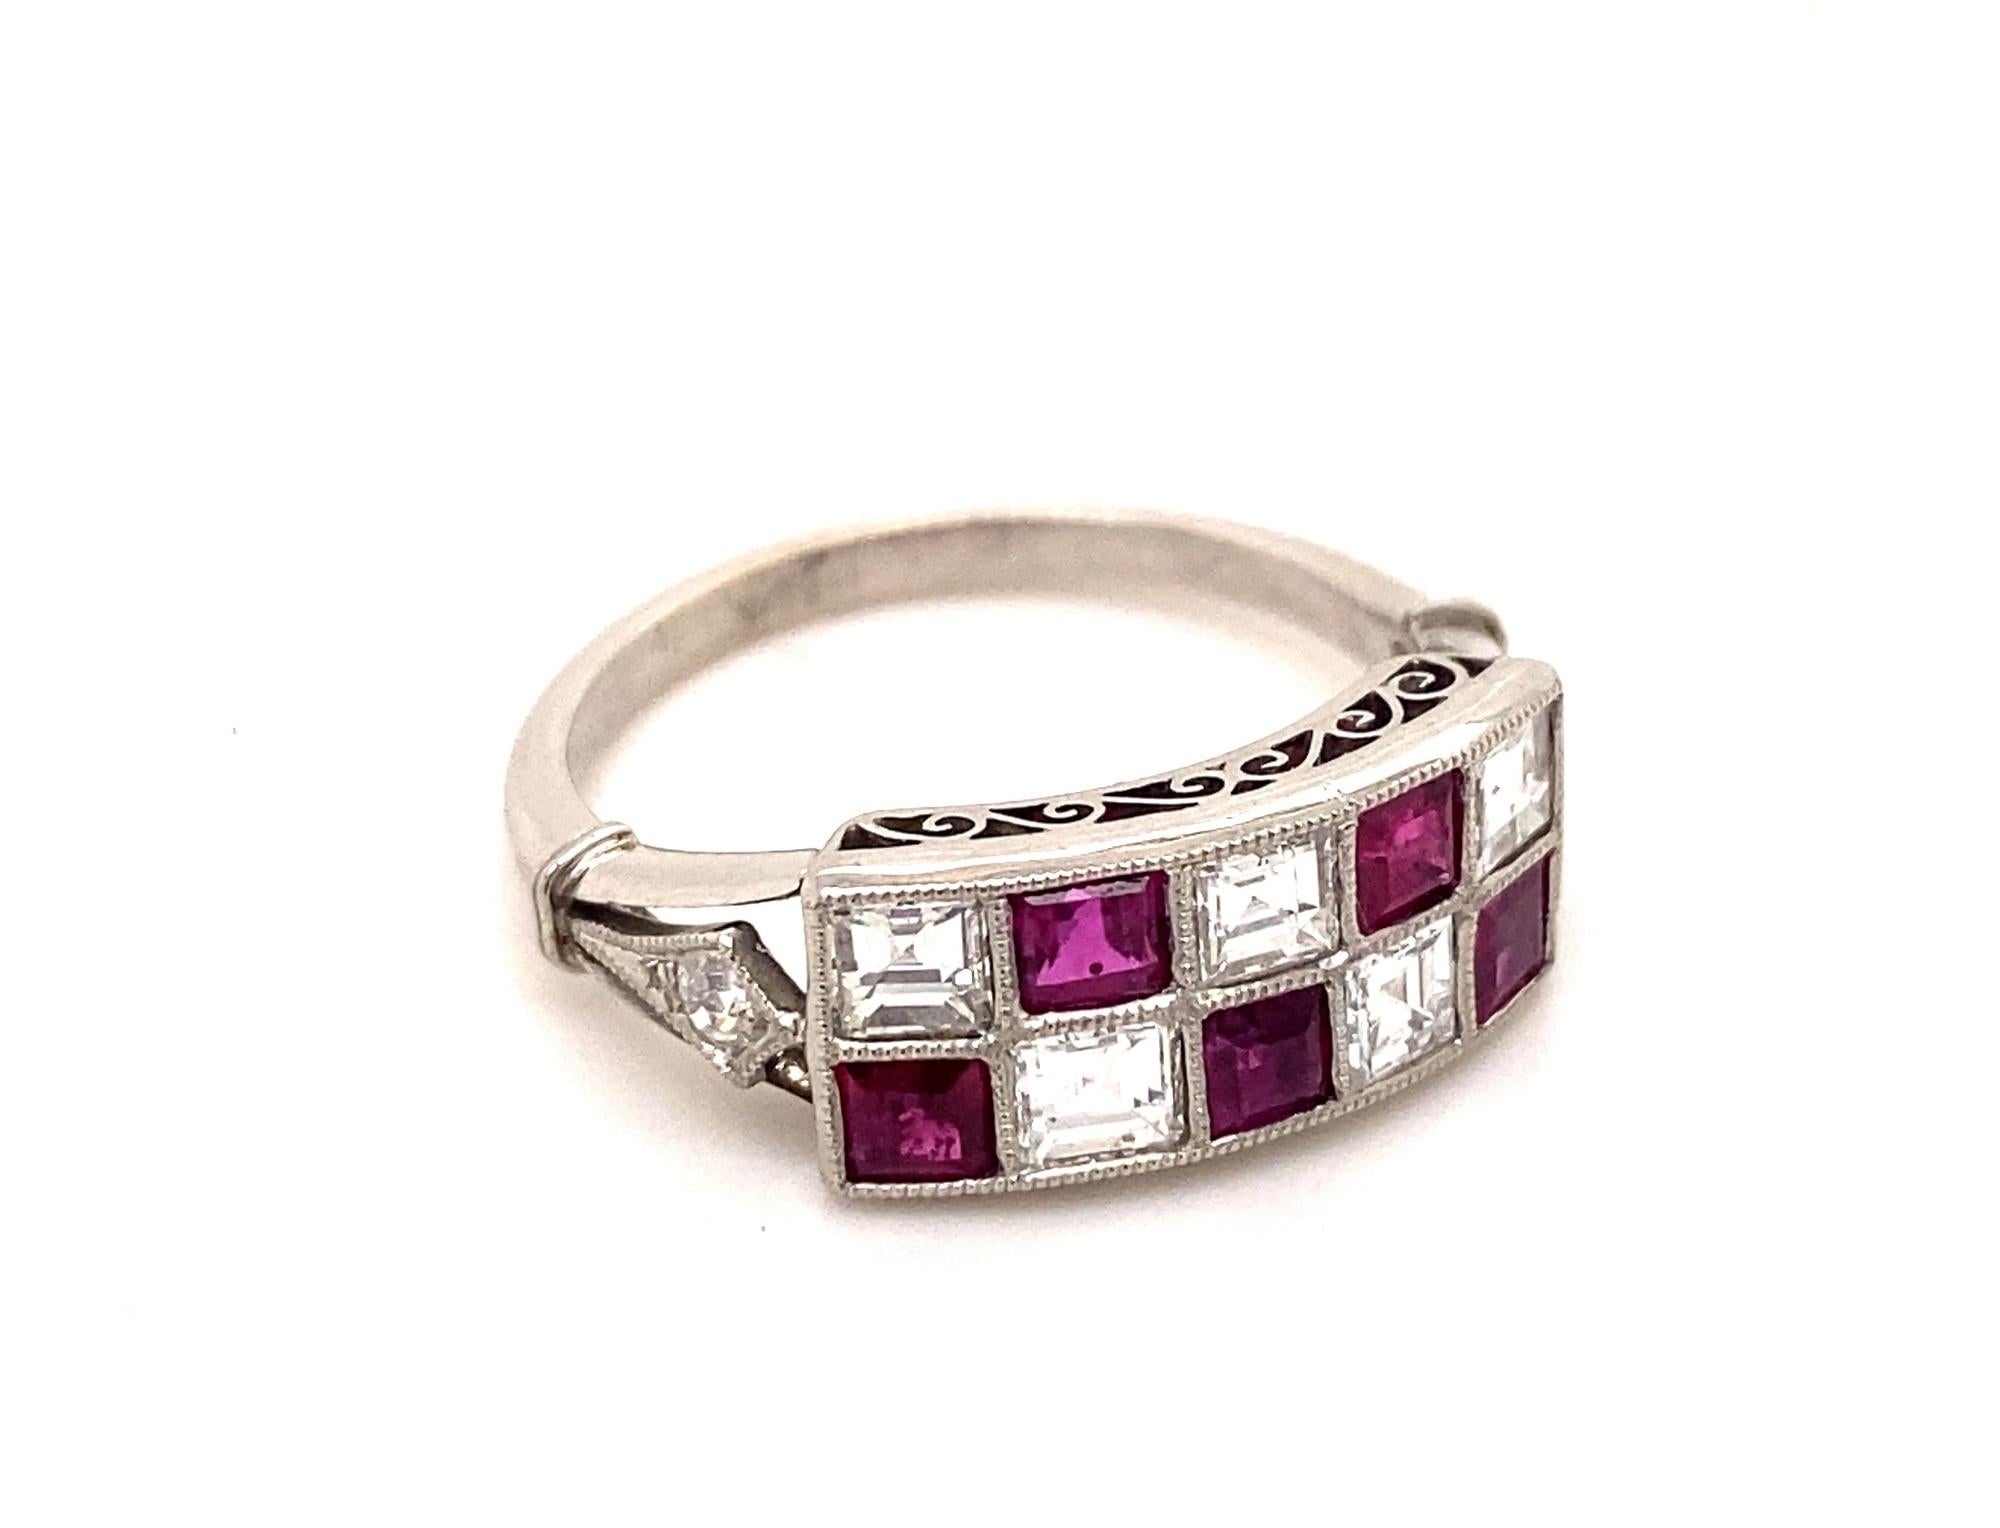 This is a beautiful art style ring set with natural Burma rubies and Ascher cut diamonds in platinum. The ring has a checkerboard like design with alternating rubies and diamonds. The rubies have deep red color and excellent clarity very